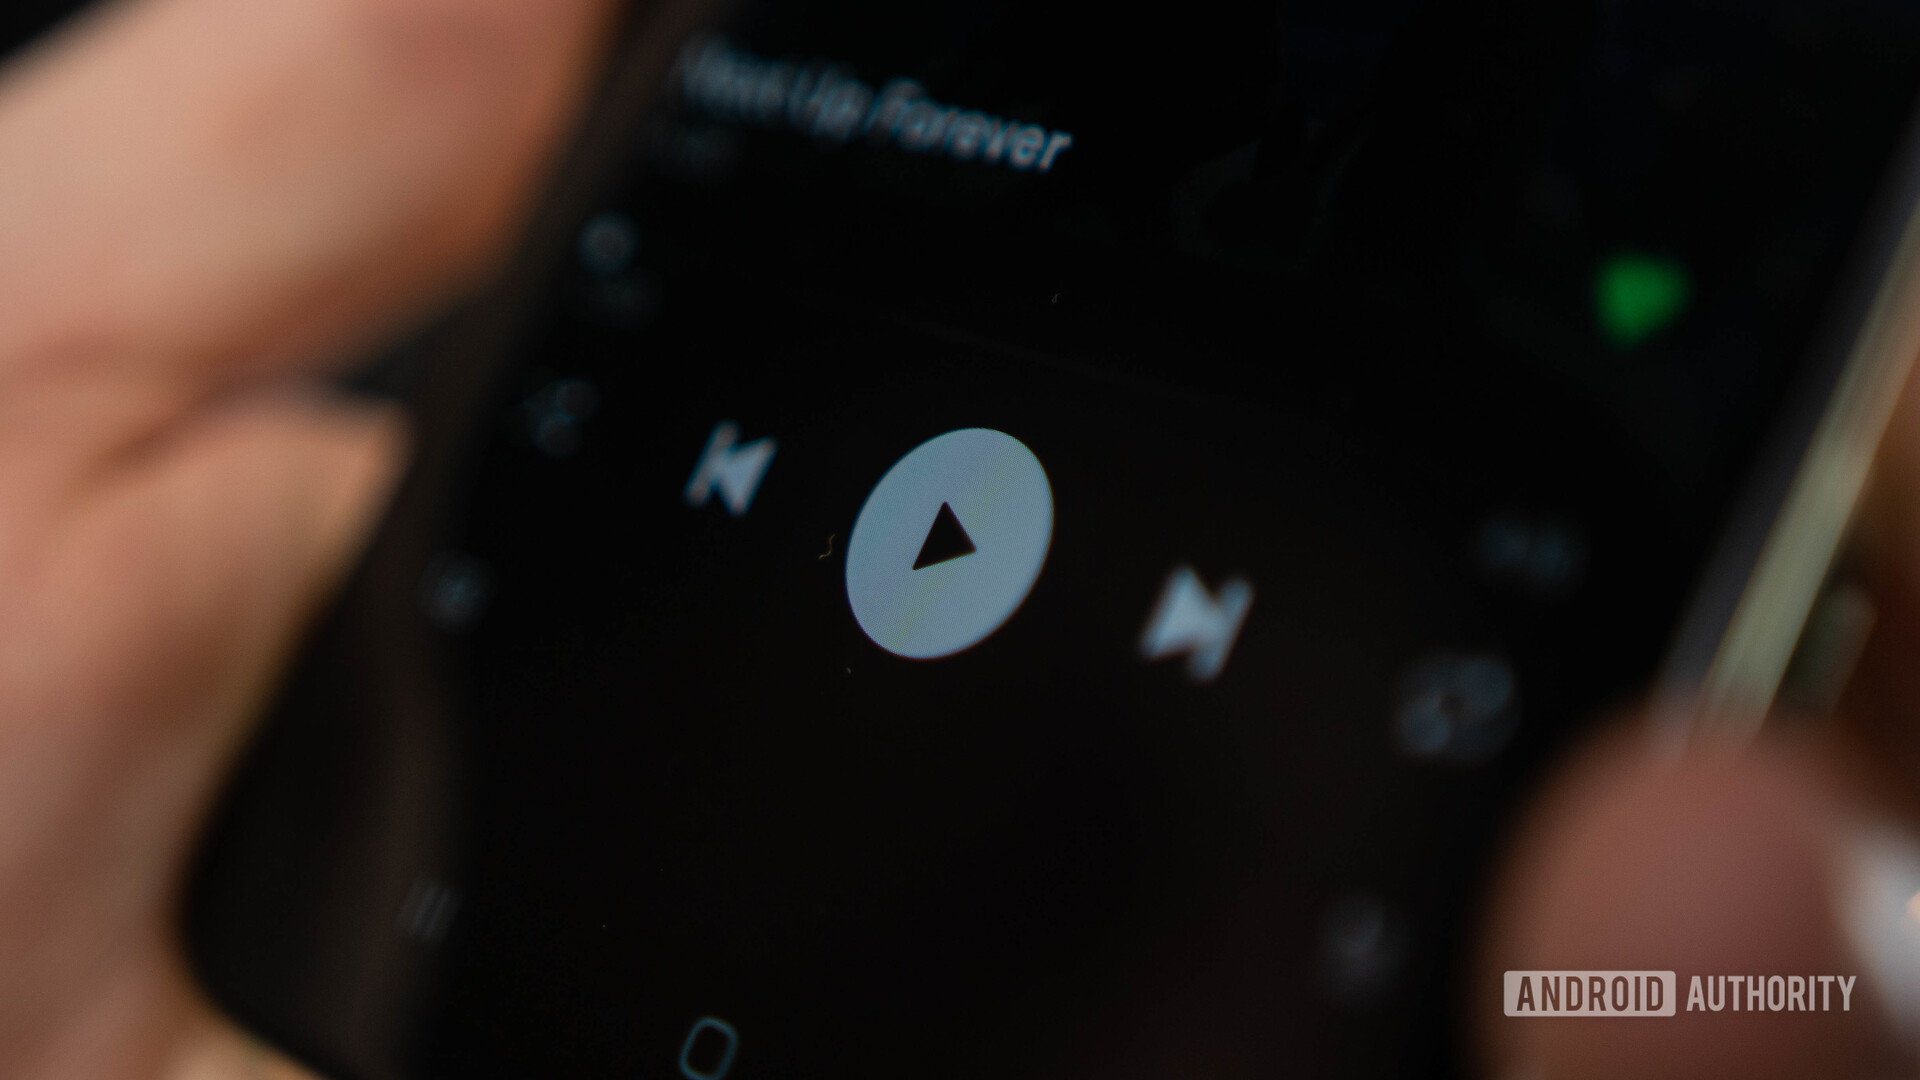 Spotify also has video streaming